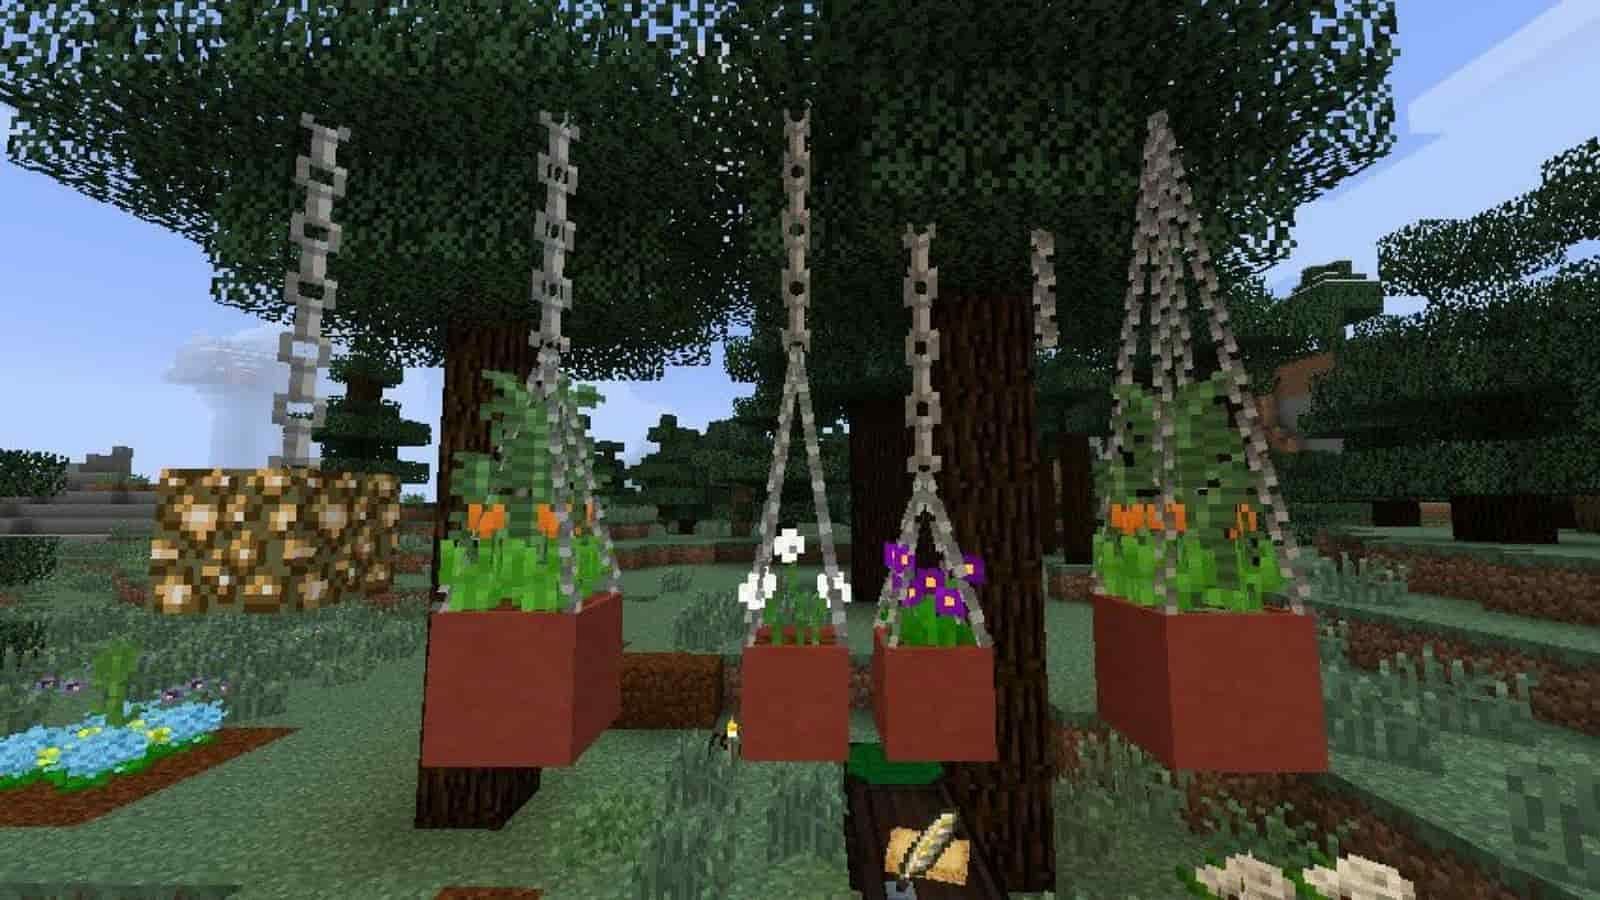 Assorted flowers used as decorations in player-made pots (Image via Mojang)